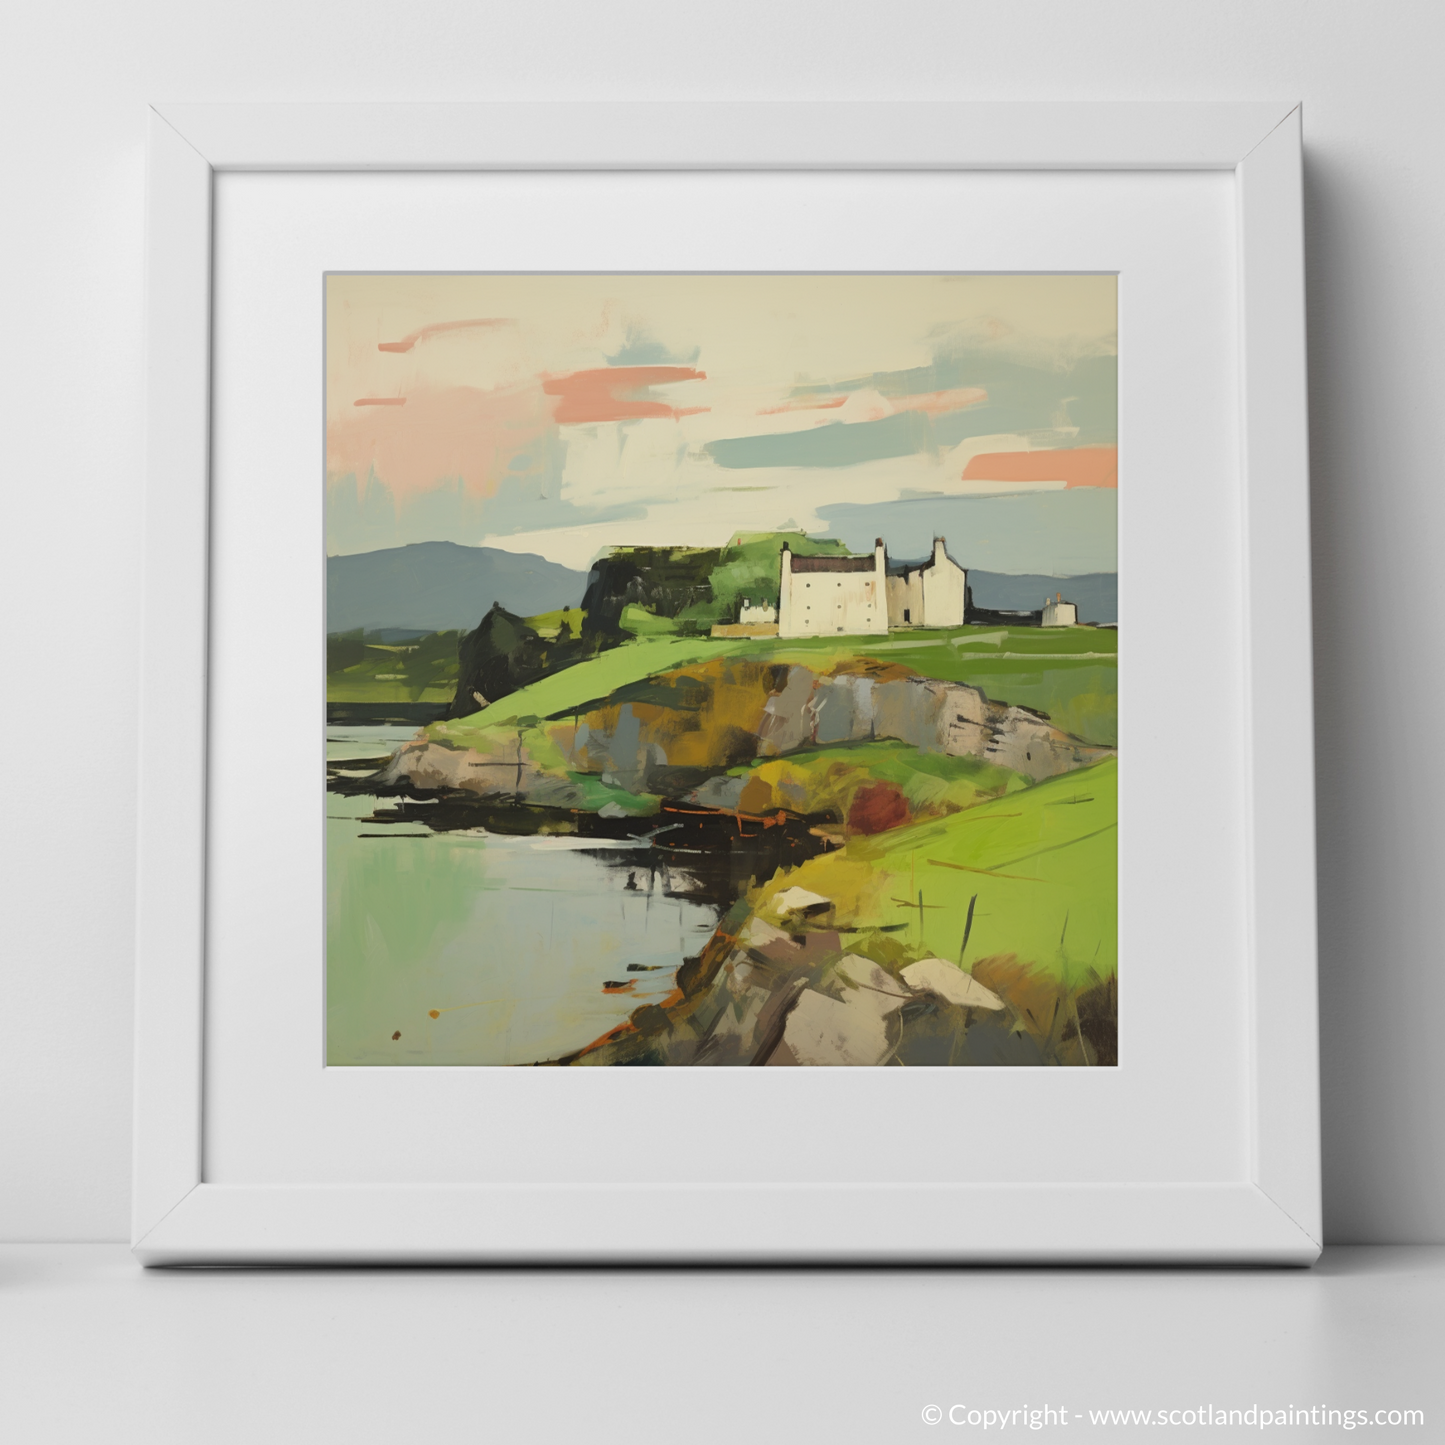 Art Print of Fort William with a white frame